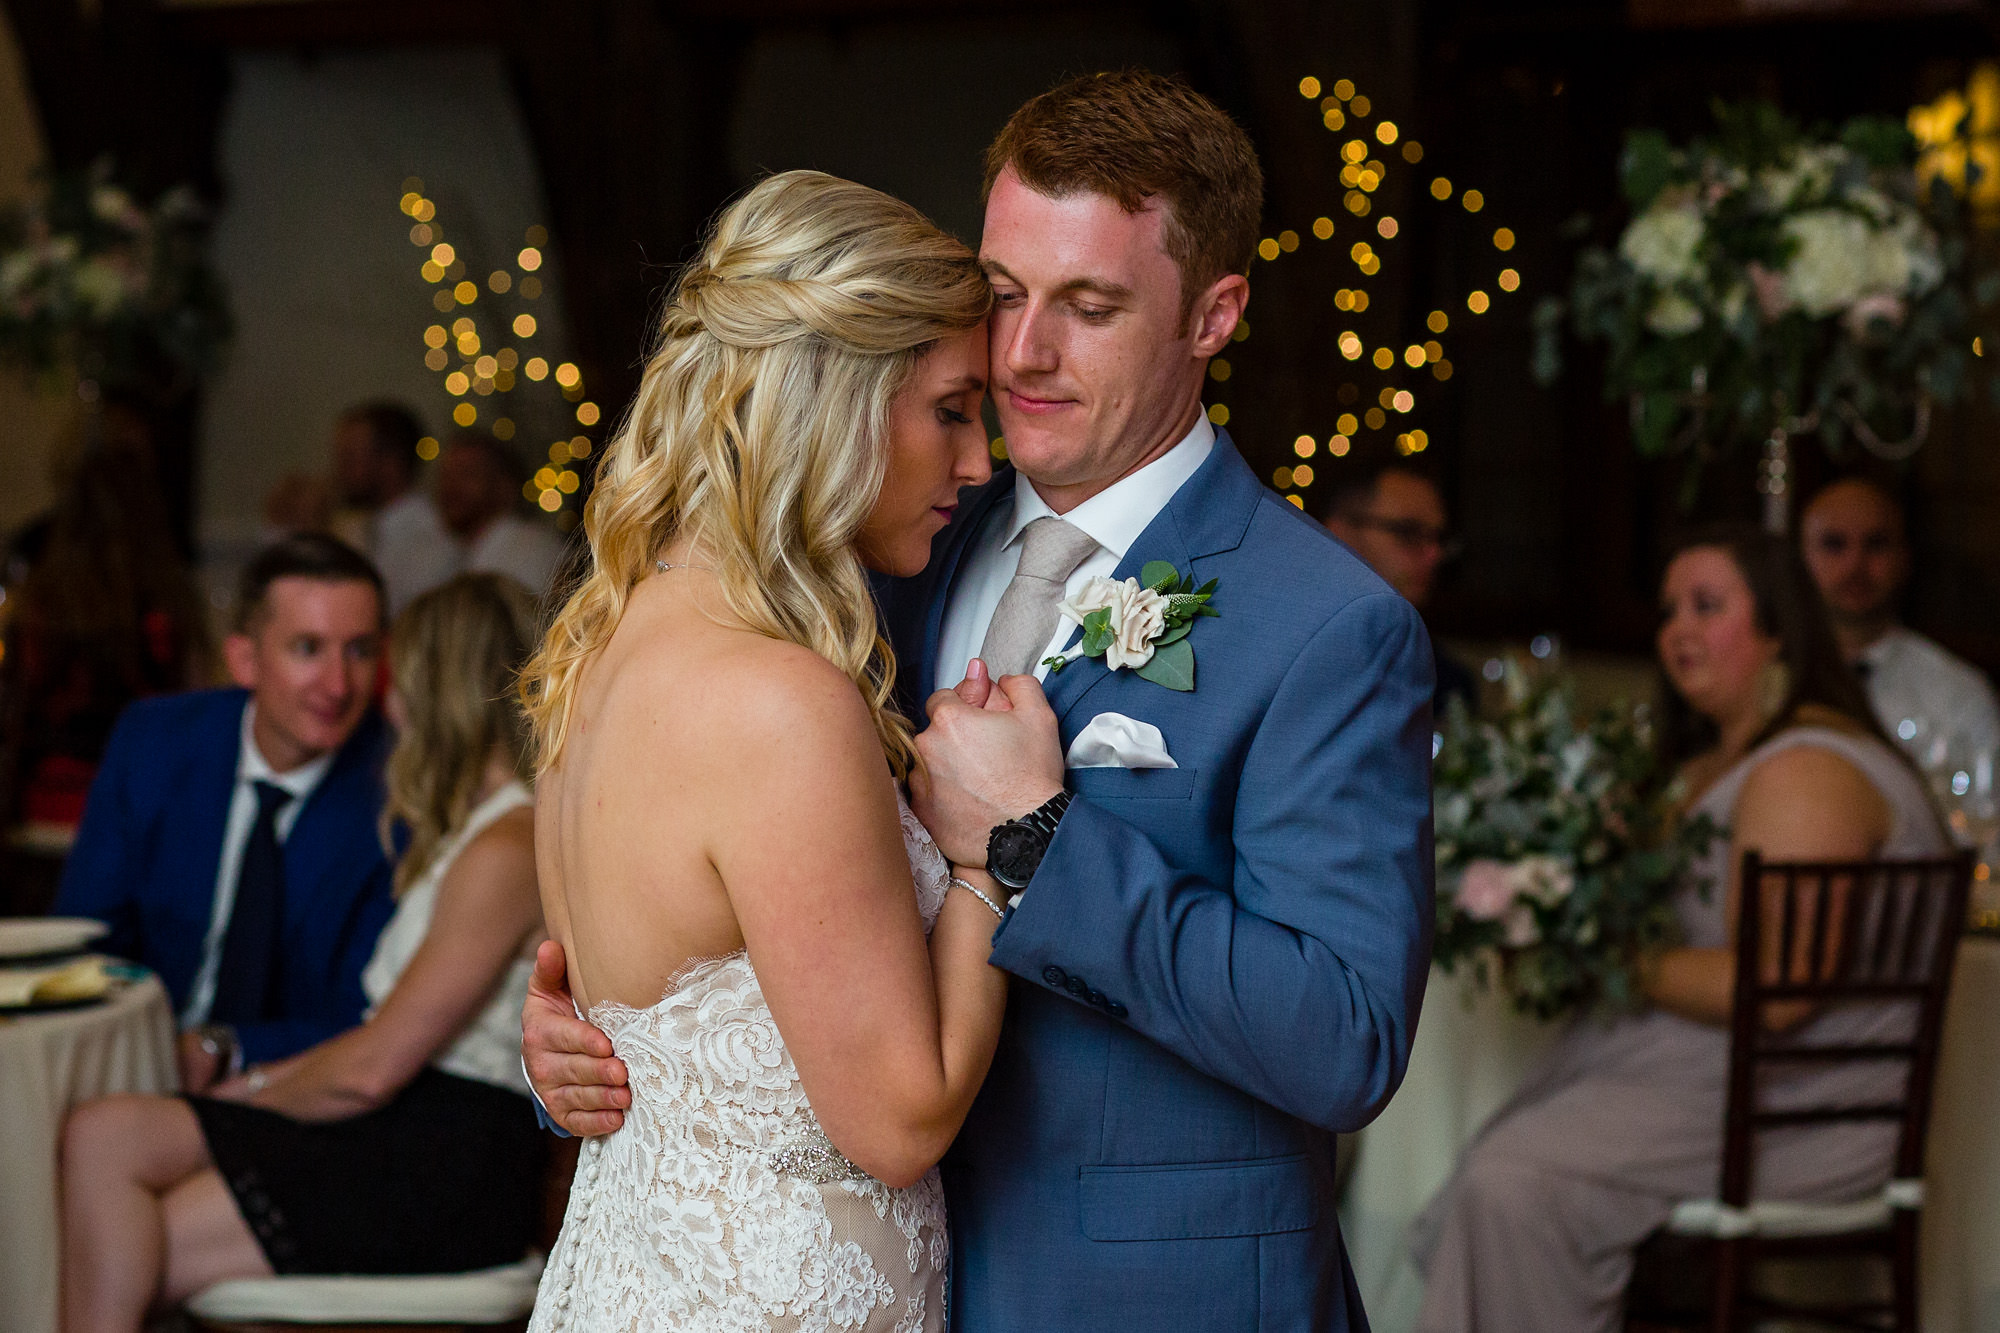 The bride and groom share a romantic first dance in the Bar Harbor Club ballroom.